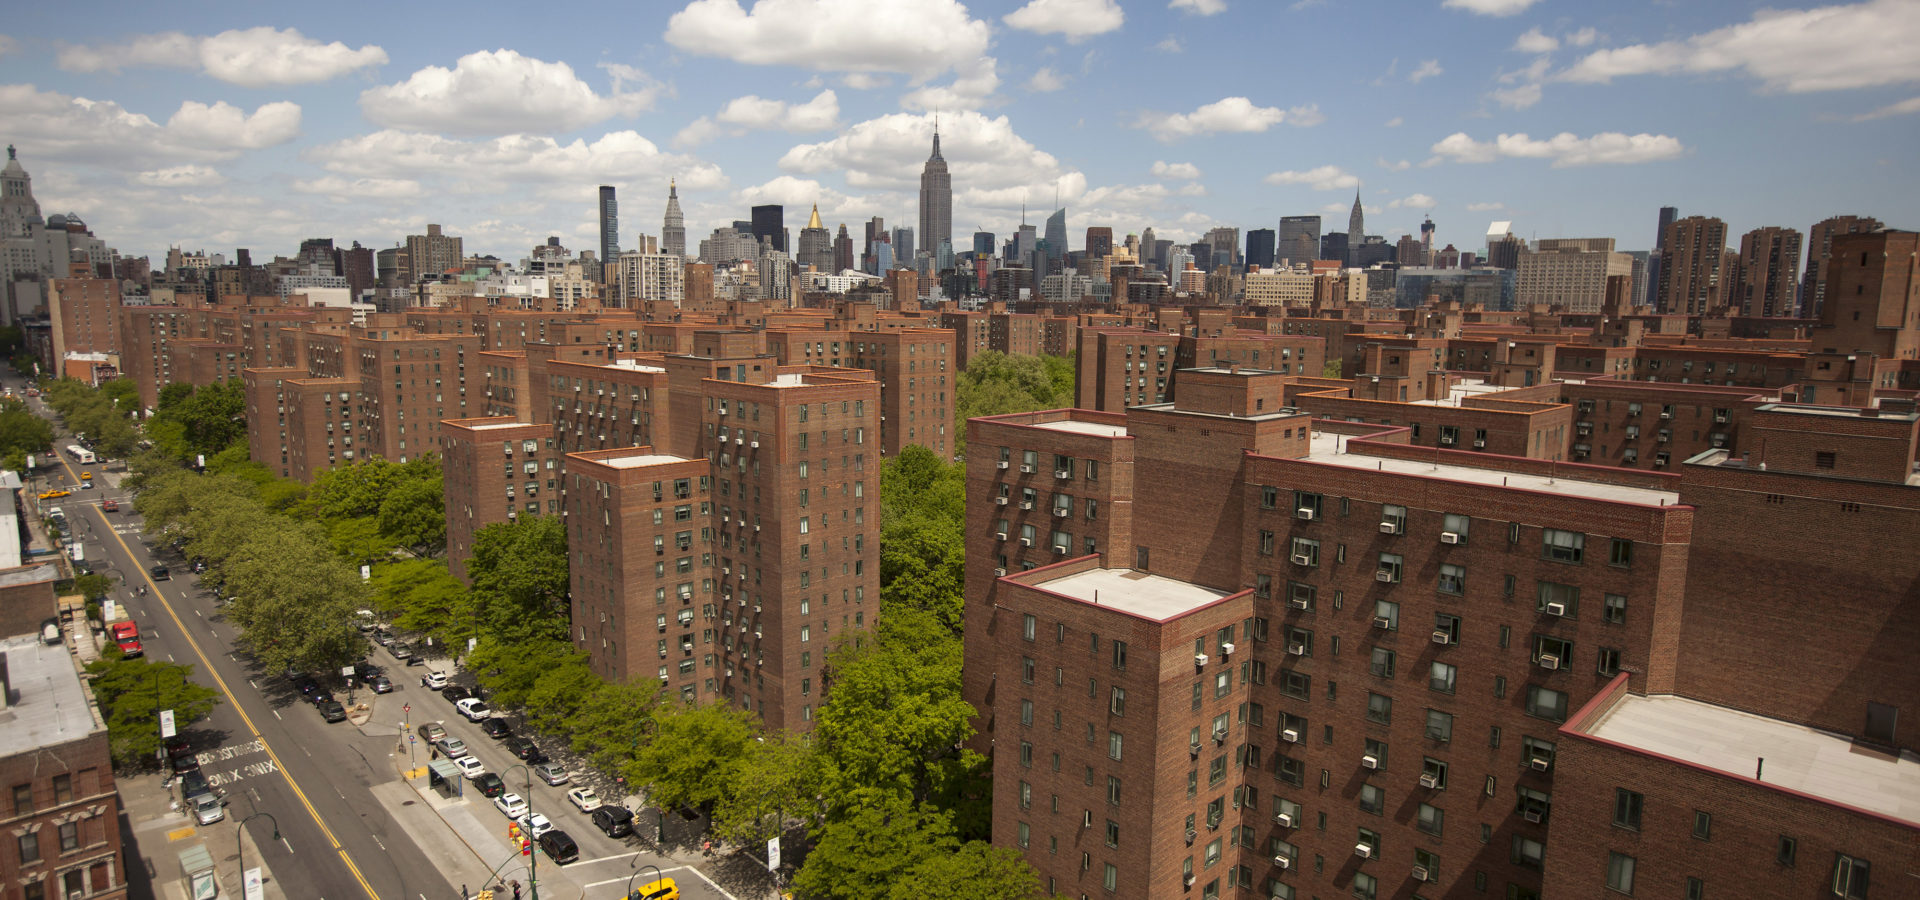 The city skyline stands past Stuyvesant Town-Peter Cooper Village, Manhattan's largest apartment complex, in New York, U.S., on Sunday, May 18, 2014. CWCapital Asset Management LLC, the loan servicer that has been in charge of Stuyvesant Town-Peter Cooper Village since its owners defaulted on a $3 billion mortgage in 2010, is holding a foreclosure sale on June 13 for $300 million of junior loans. While CWCapital holds that debt and is poised to officially take over the property at the auction, other bidders may come with their own plans to pay off bondholders. Photographer: Michael Nagle/Bloomberg